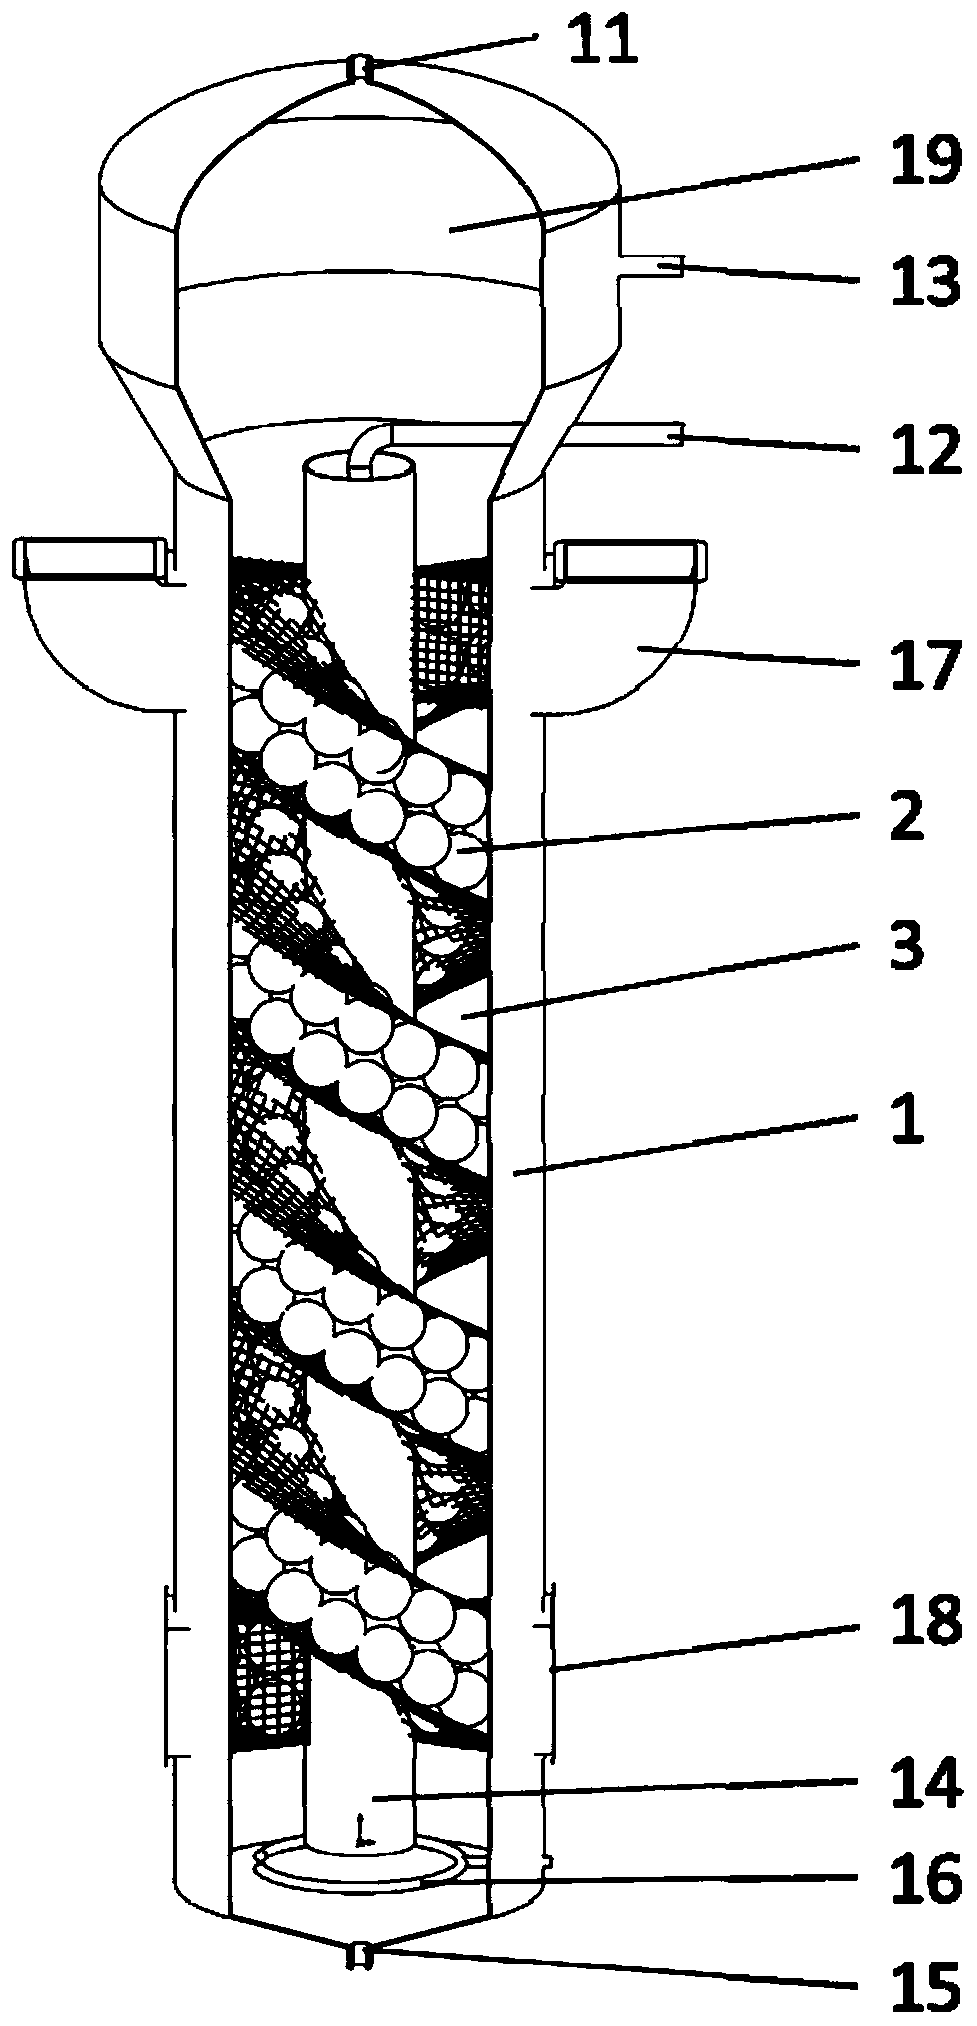 A spiral bed biofilm reactor for sewage treatment